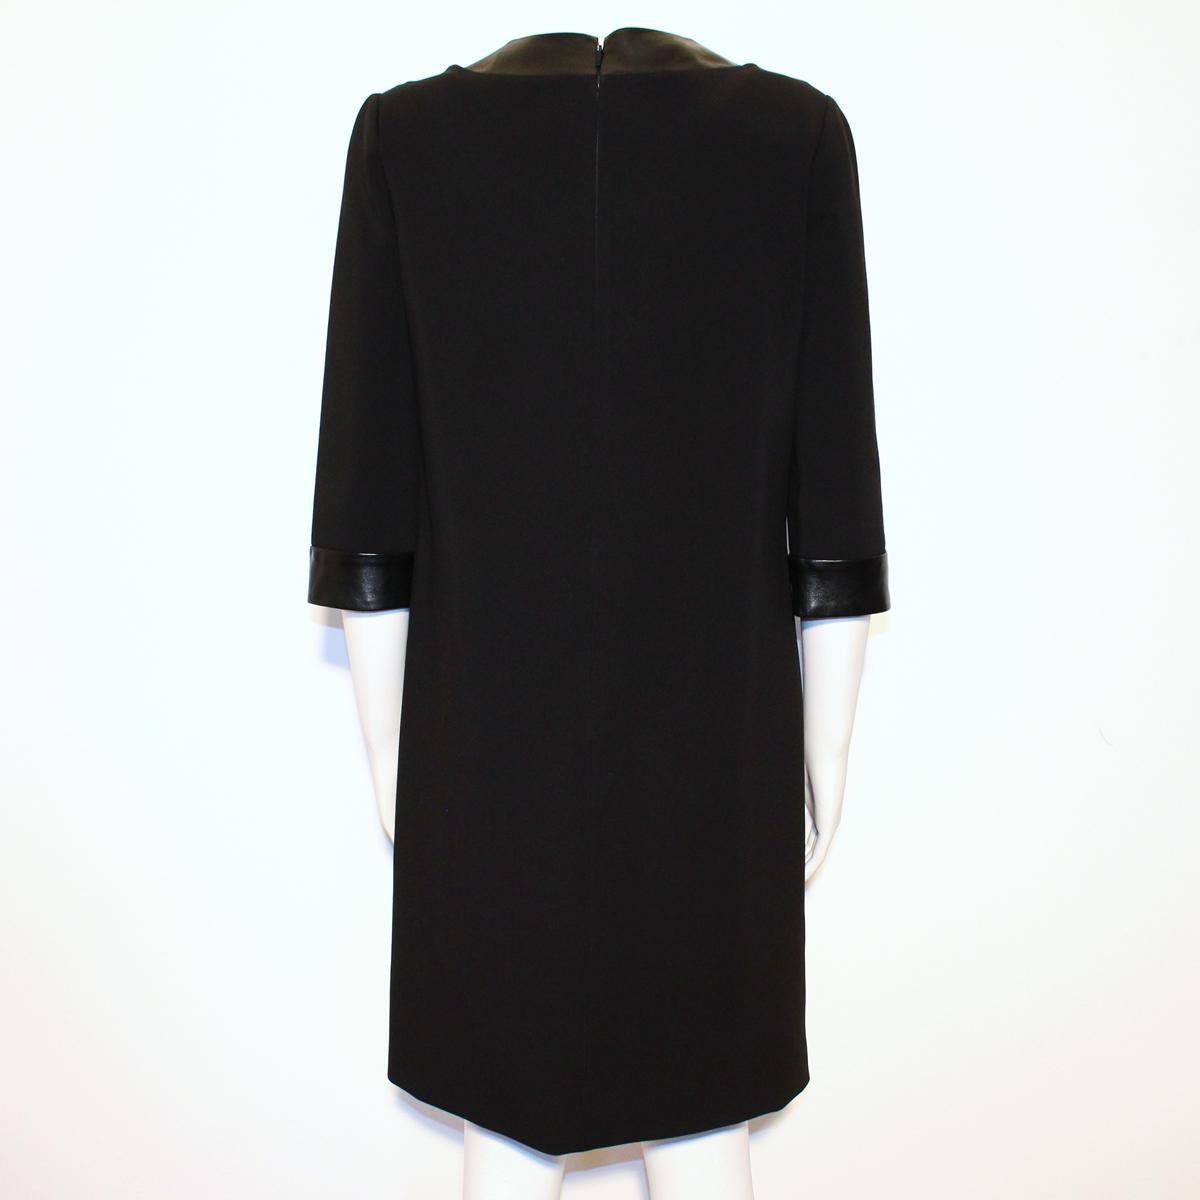 Very chic dress by Gucci
Viscose (85%), nylon and elasthane
Leather on 